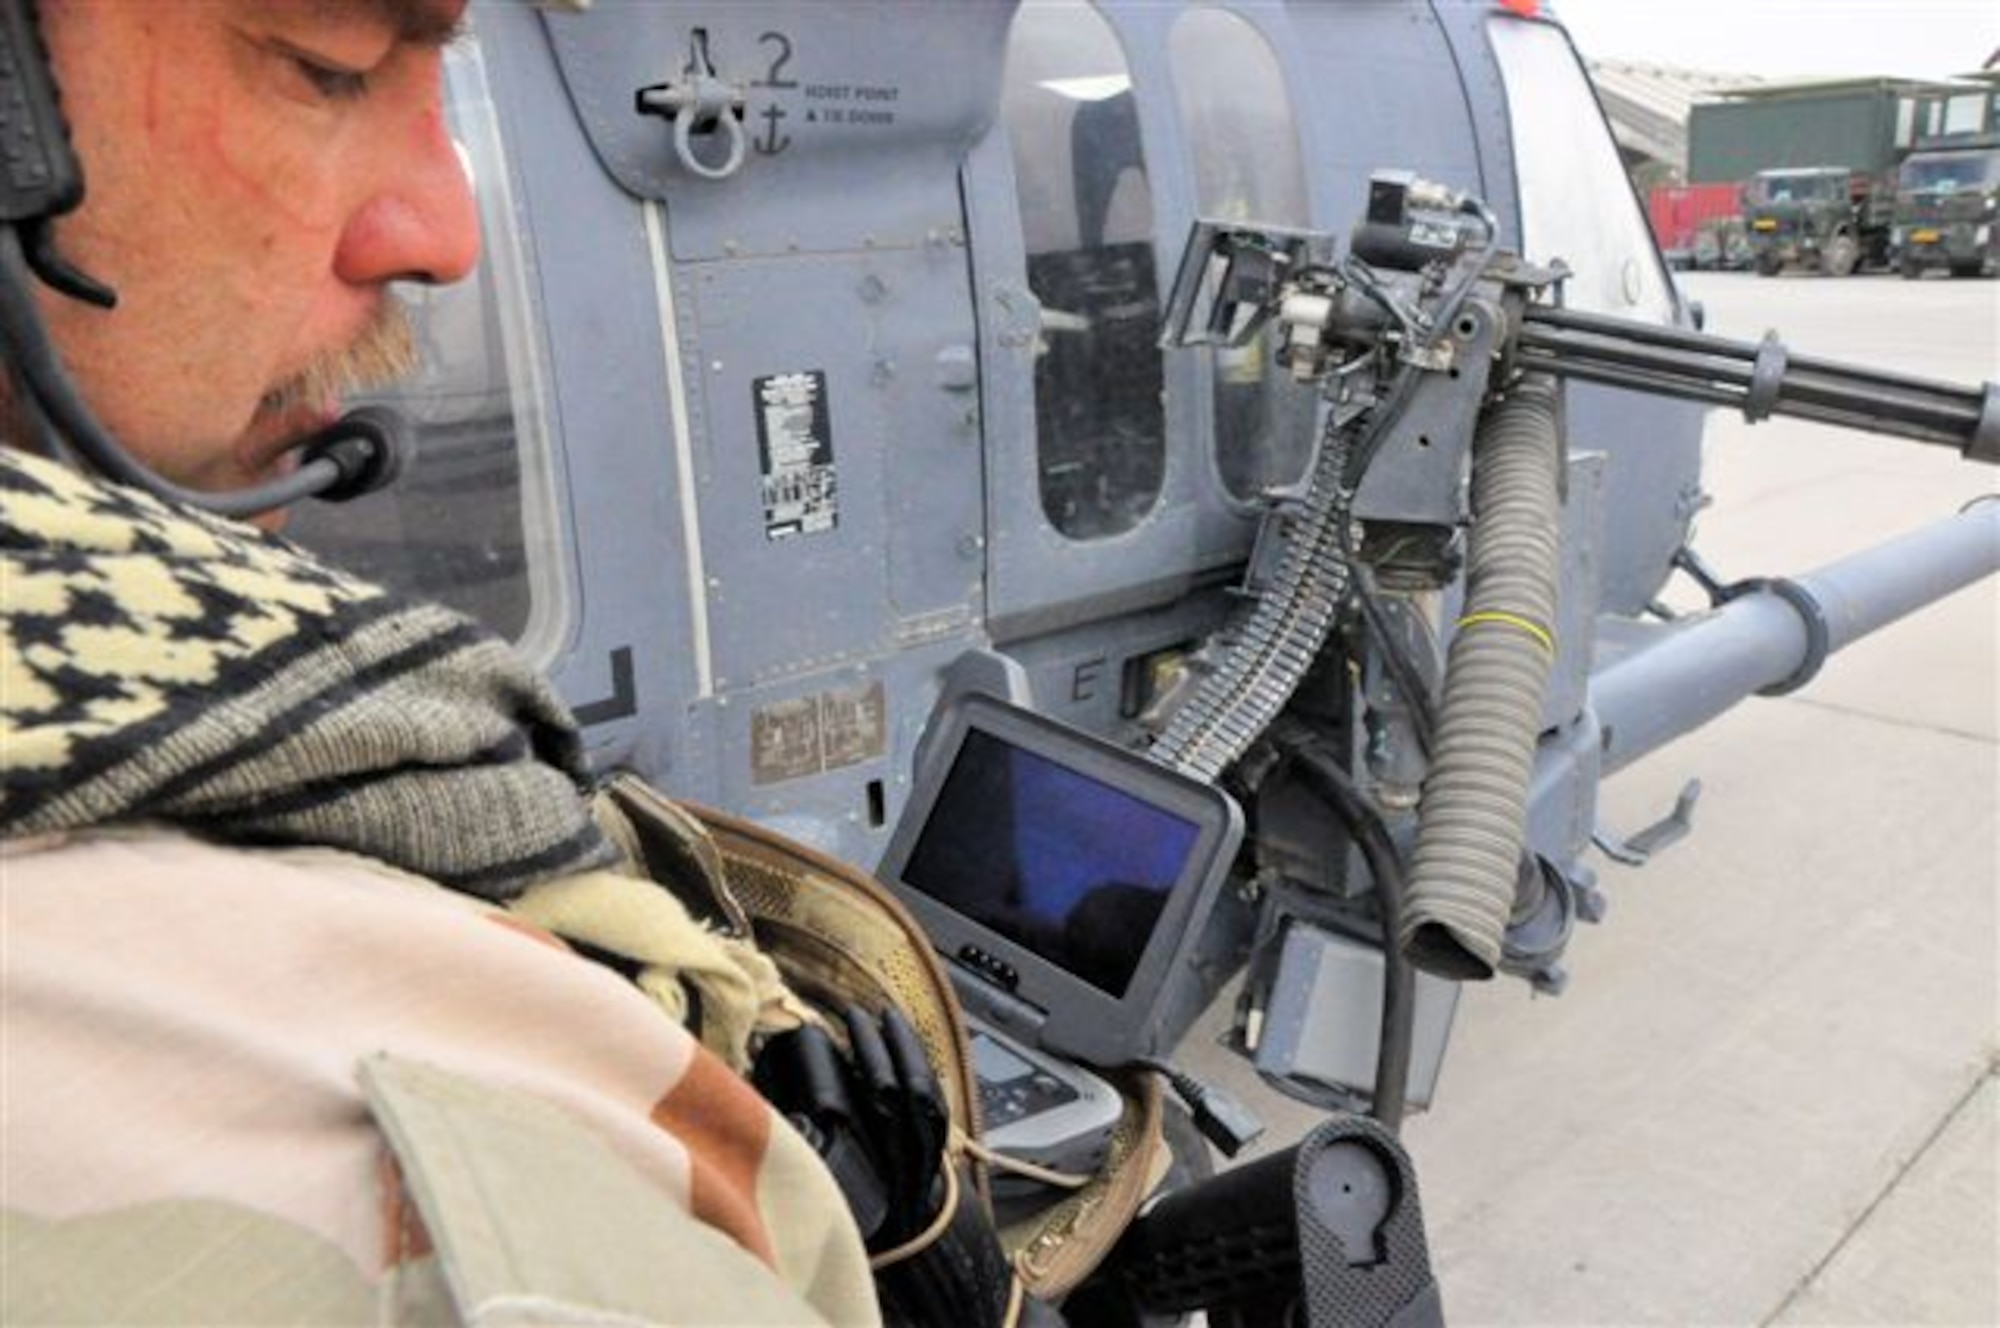 Master Sergeant Robert W. Bean, outfitted with more than 80 pounds of combat, communications and medical gear, prepares to embark on a mission in southern Afghanistan. His equipment includes a wearable computer and other technology developed by the Air Force Research Laboratory’s 711th Human Effectiveness Directorate—designed to reduce weight and increase U. S. warfighters’ efficiency in the field—which MSgt. Bean and fellow pararescue jumpers field-evaluated for application to their rescue-and-recovery mission. (Air Force photo)